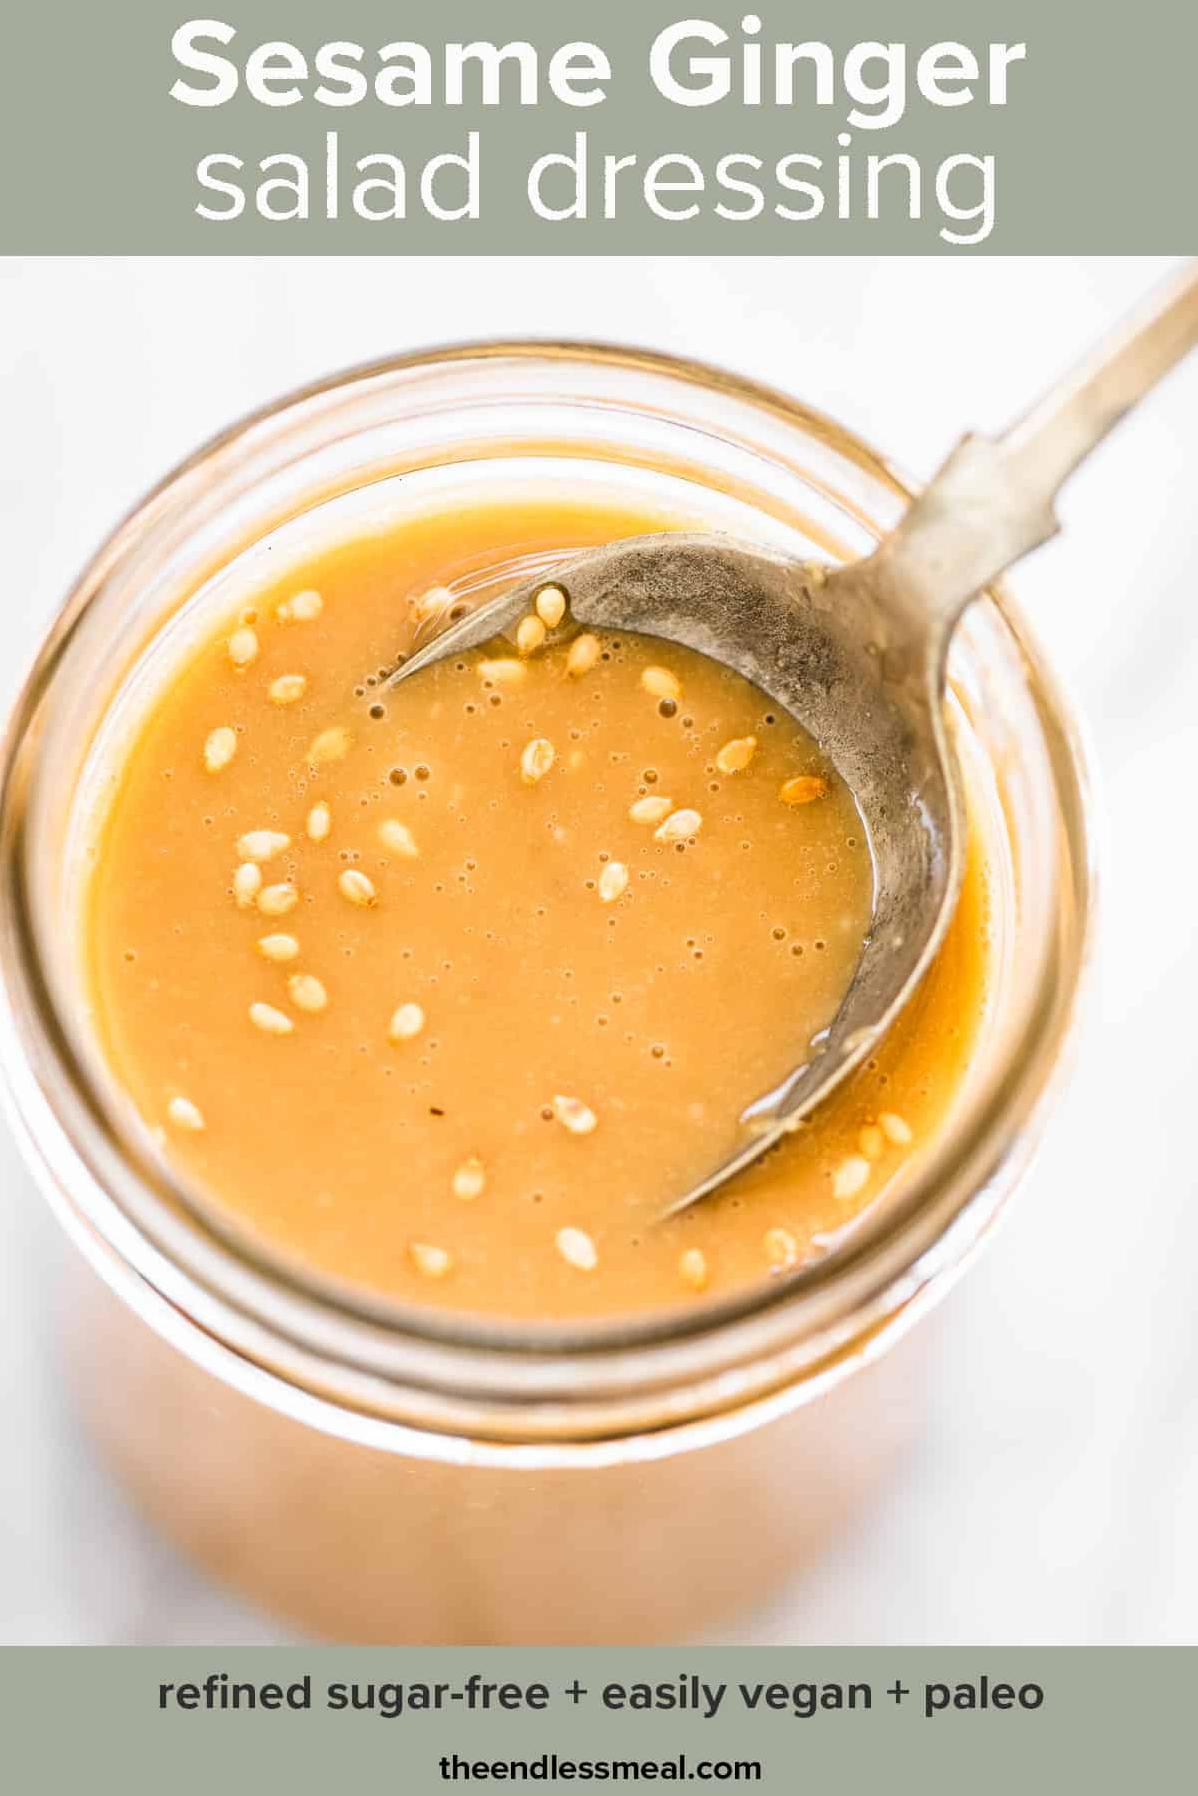  Add a zesty touch to your salad with this easy-to-make dressing.